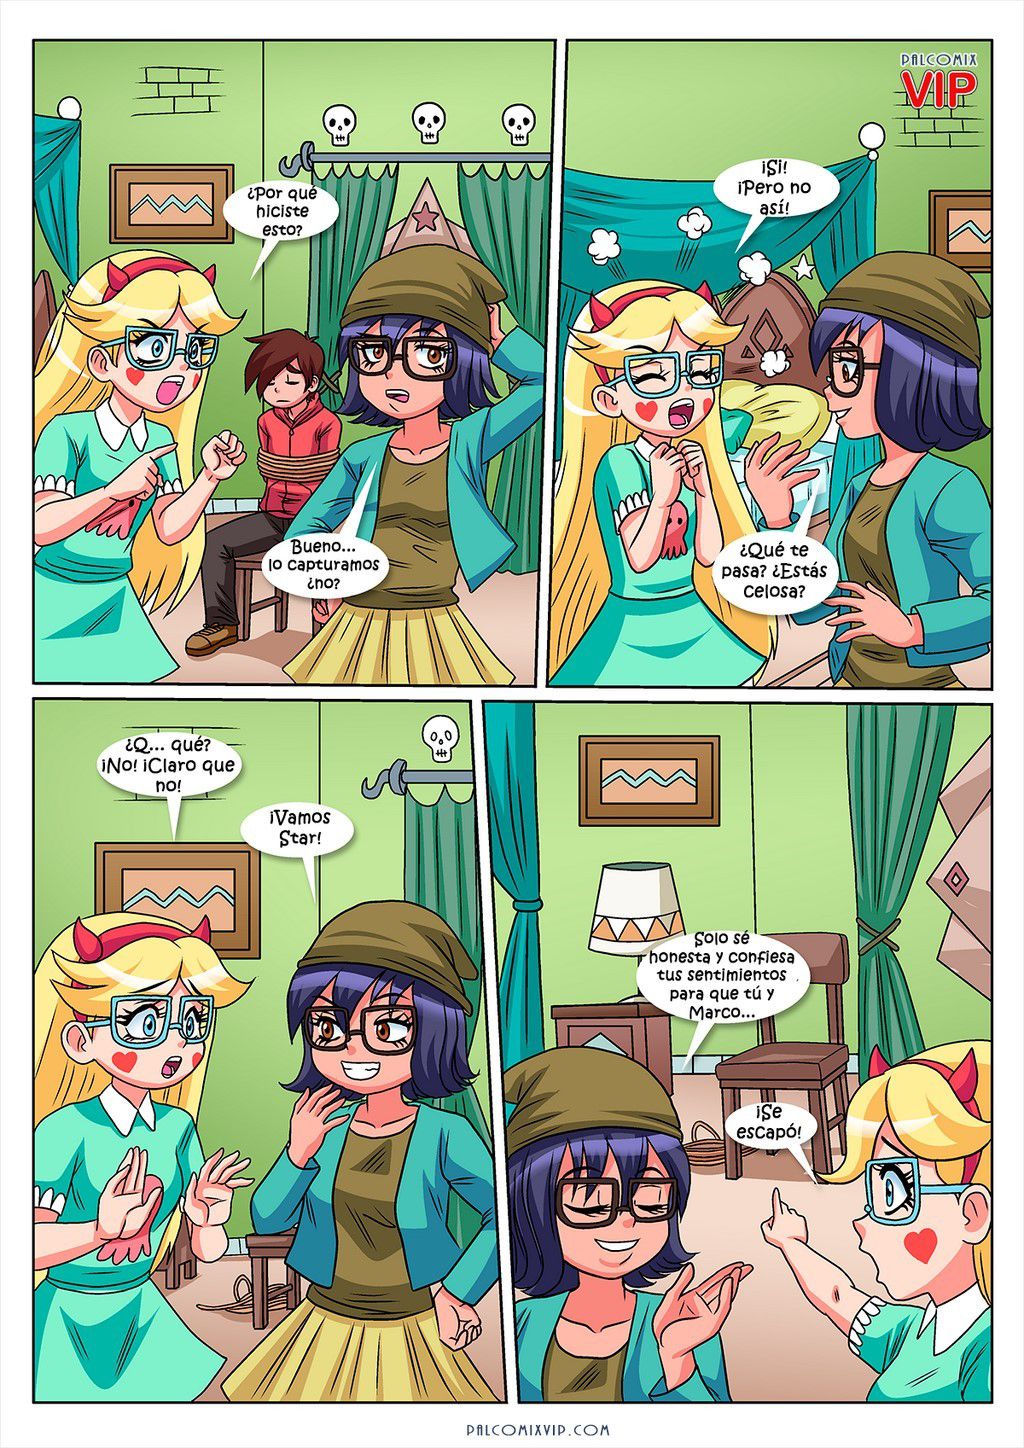 [Palcomix] Amante Latino (Star vs. the Forces of Evil) [Spanish] 19